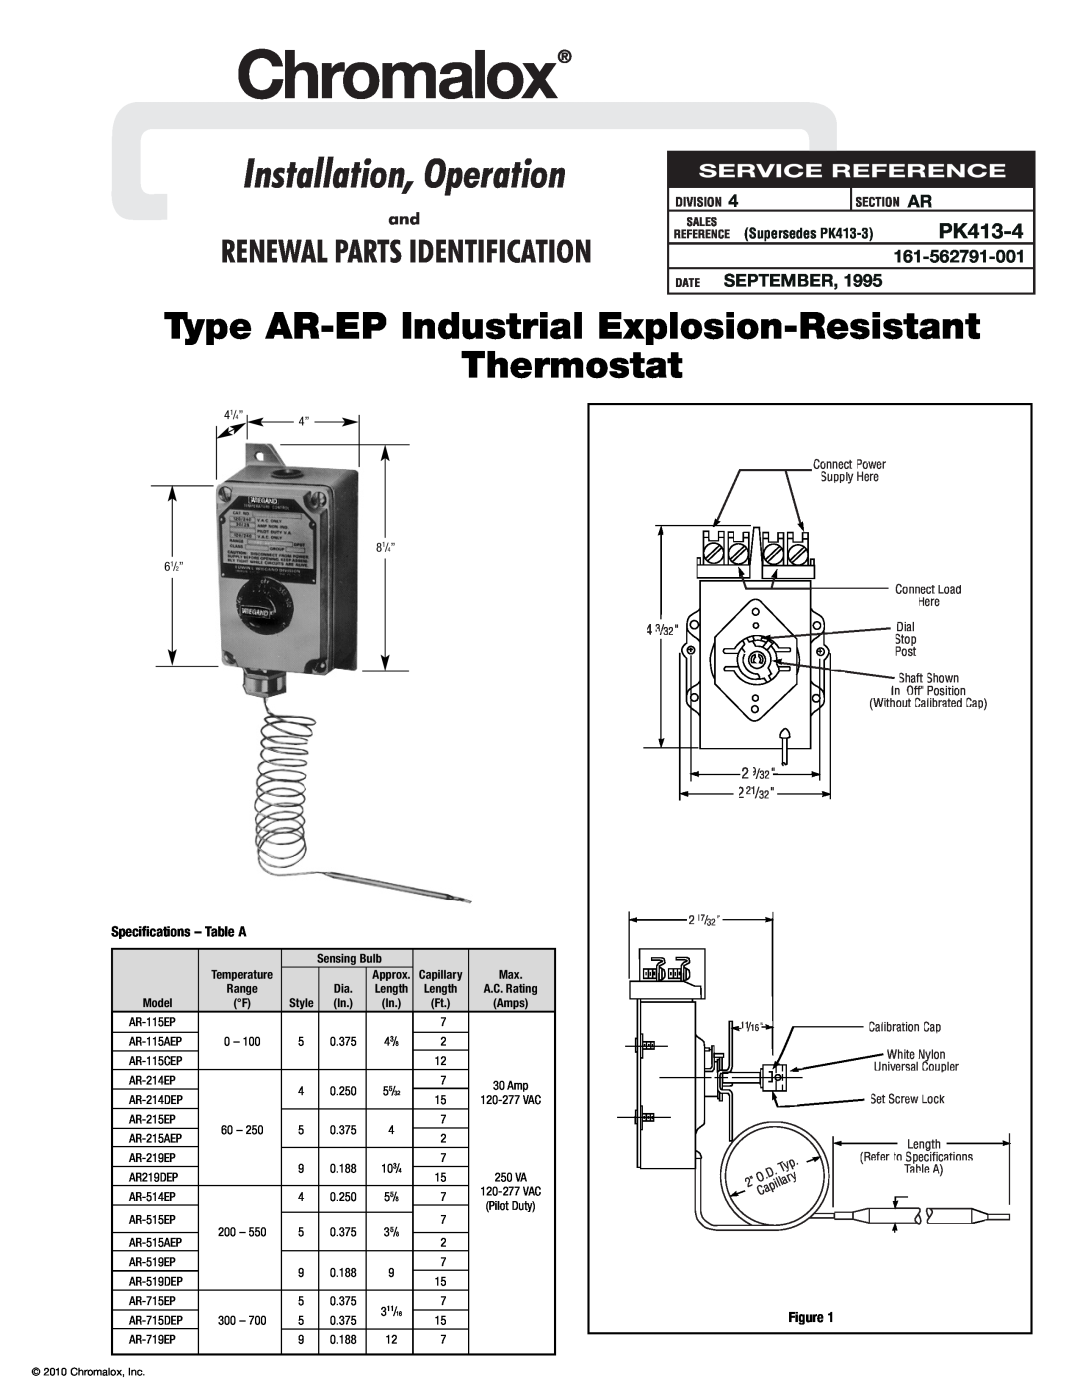 Chromalox PK413-4 specifications September, Installation, Operation, Type AR-EP Industrial Explosion-Resistant Thermostat 